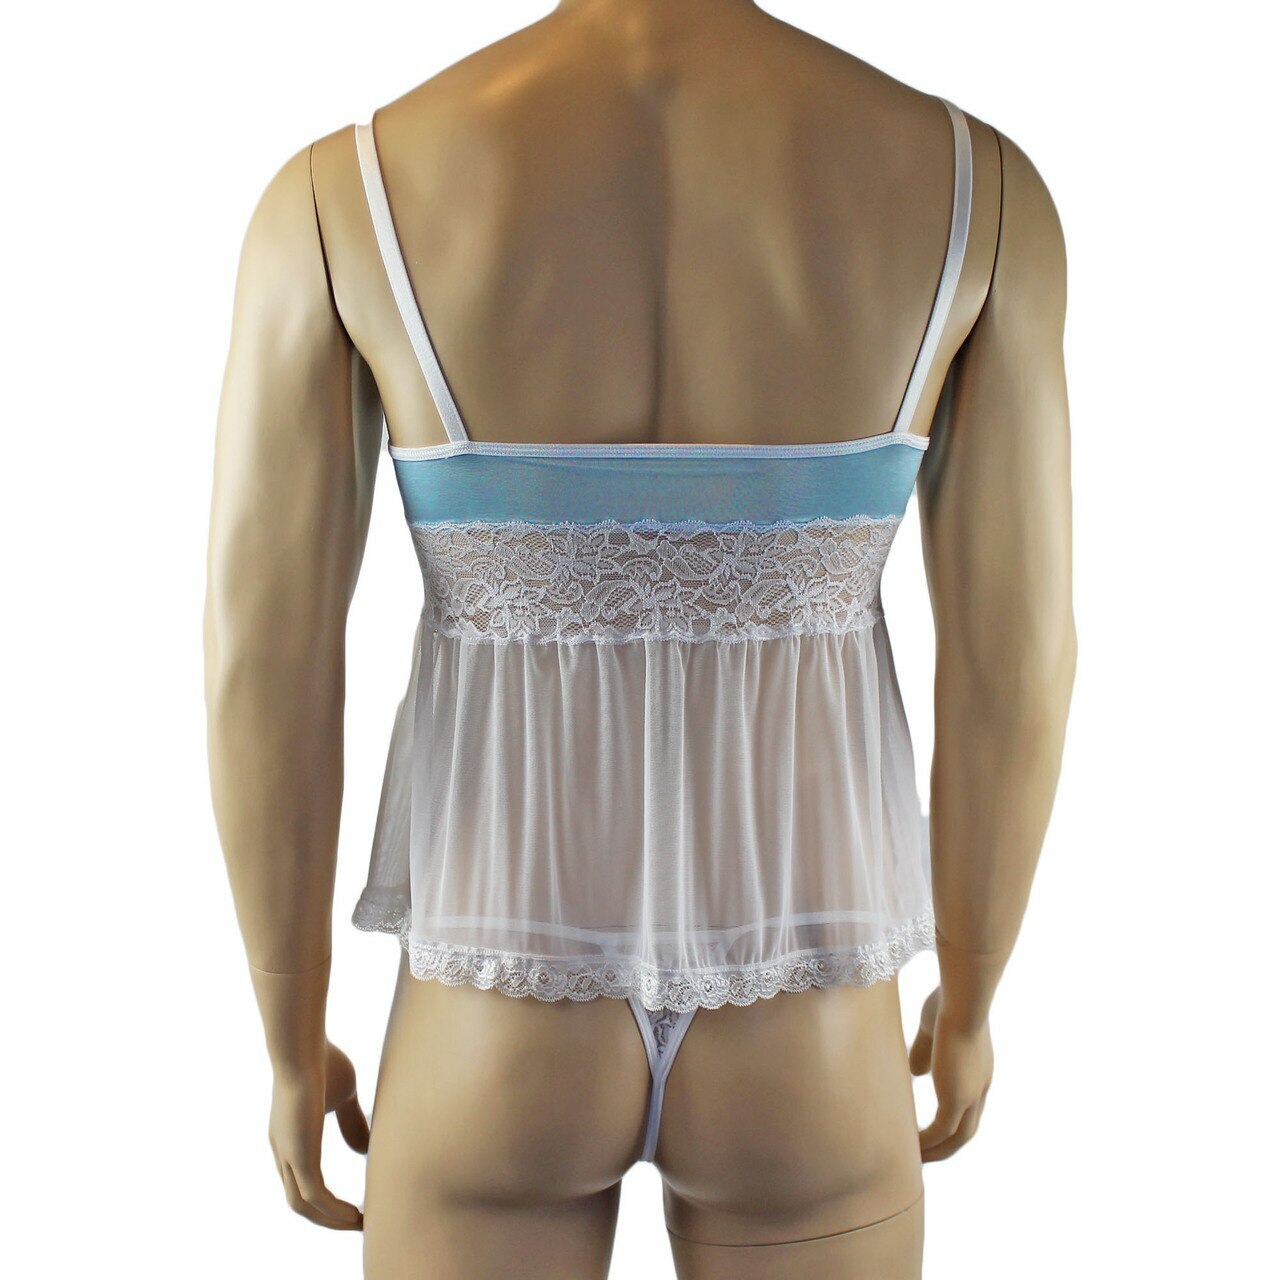 Mens Joanne Mini Babydoll Camisole & G string - Sizes up to 3XL Light Blue and White